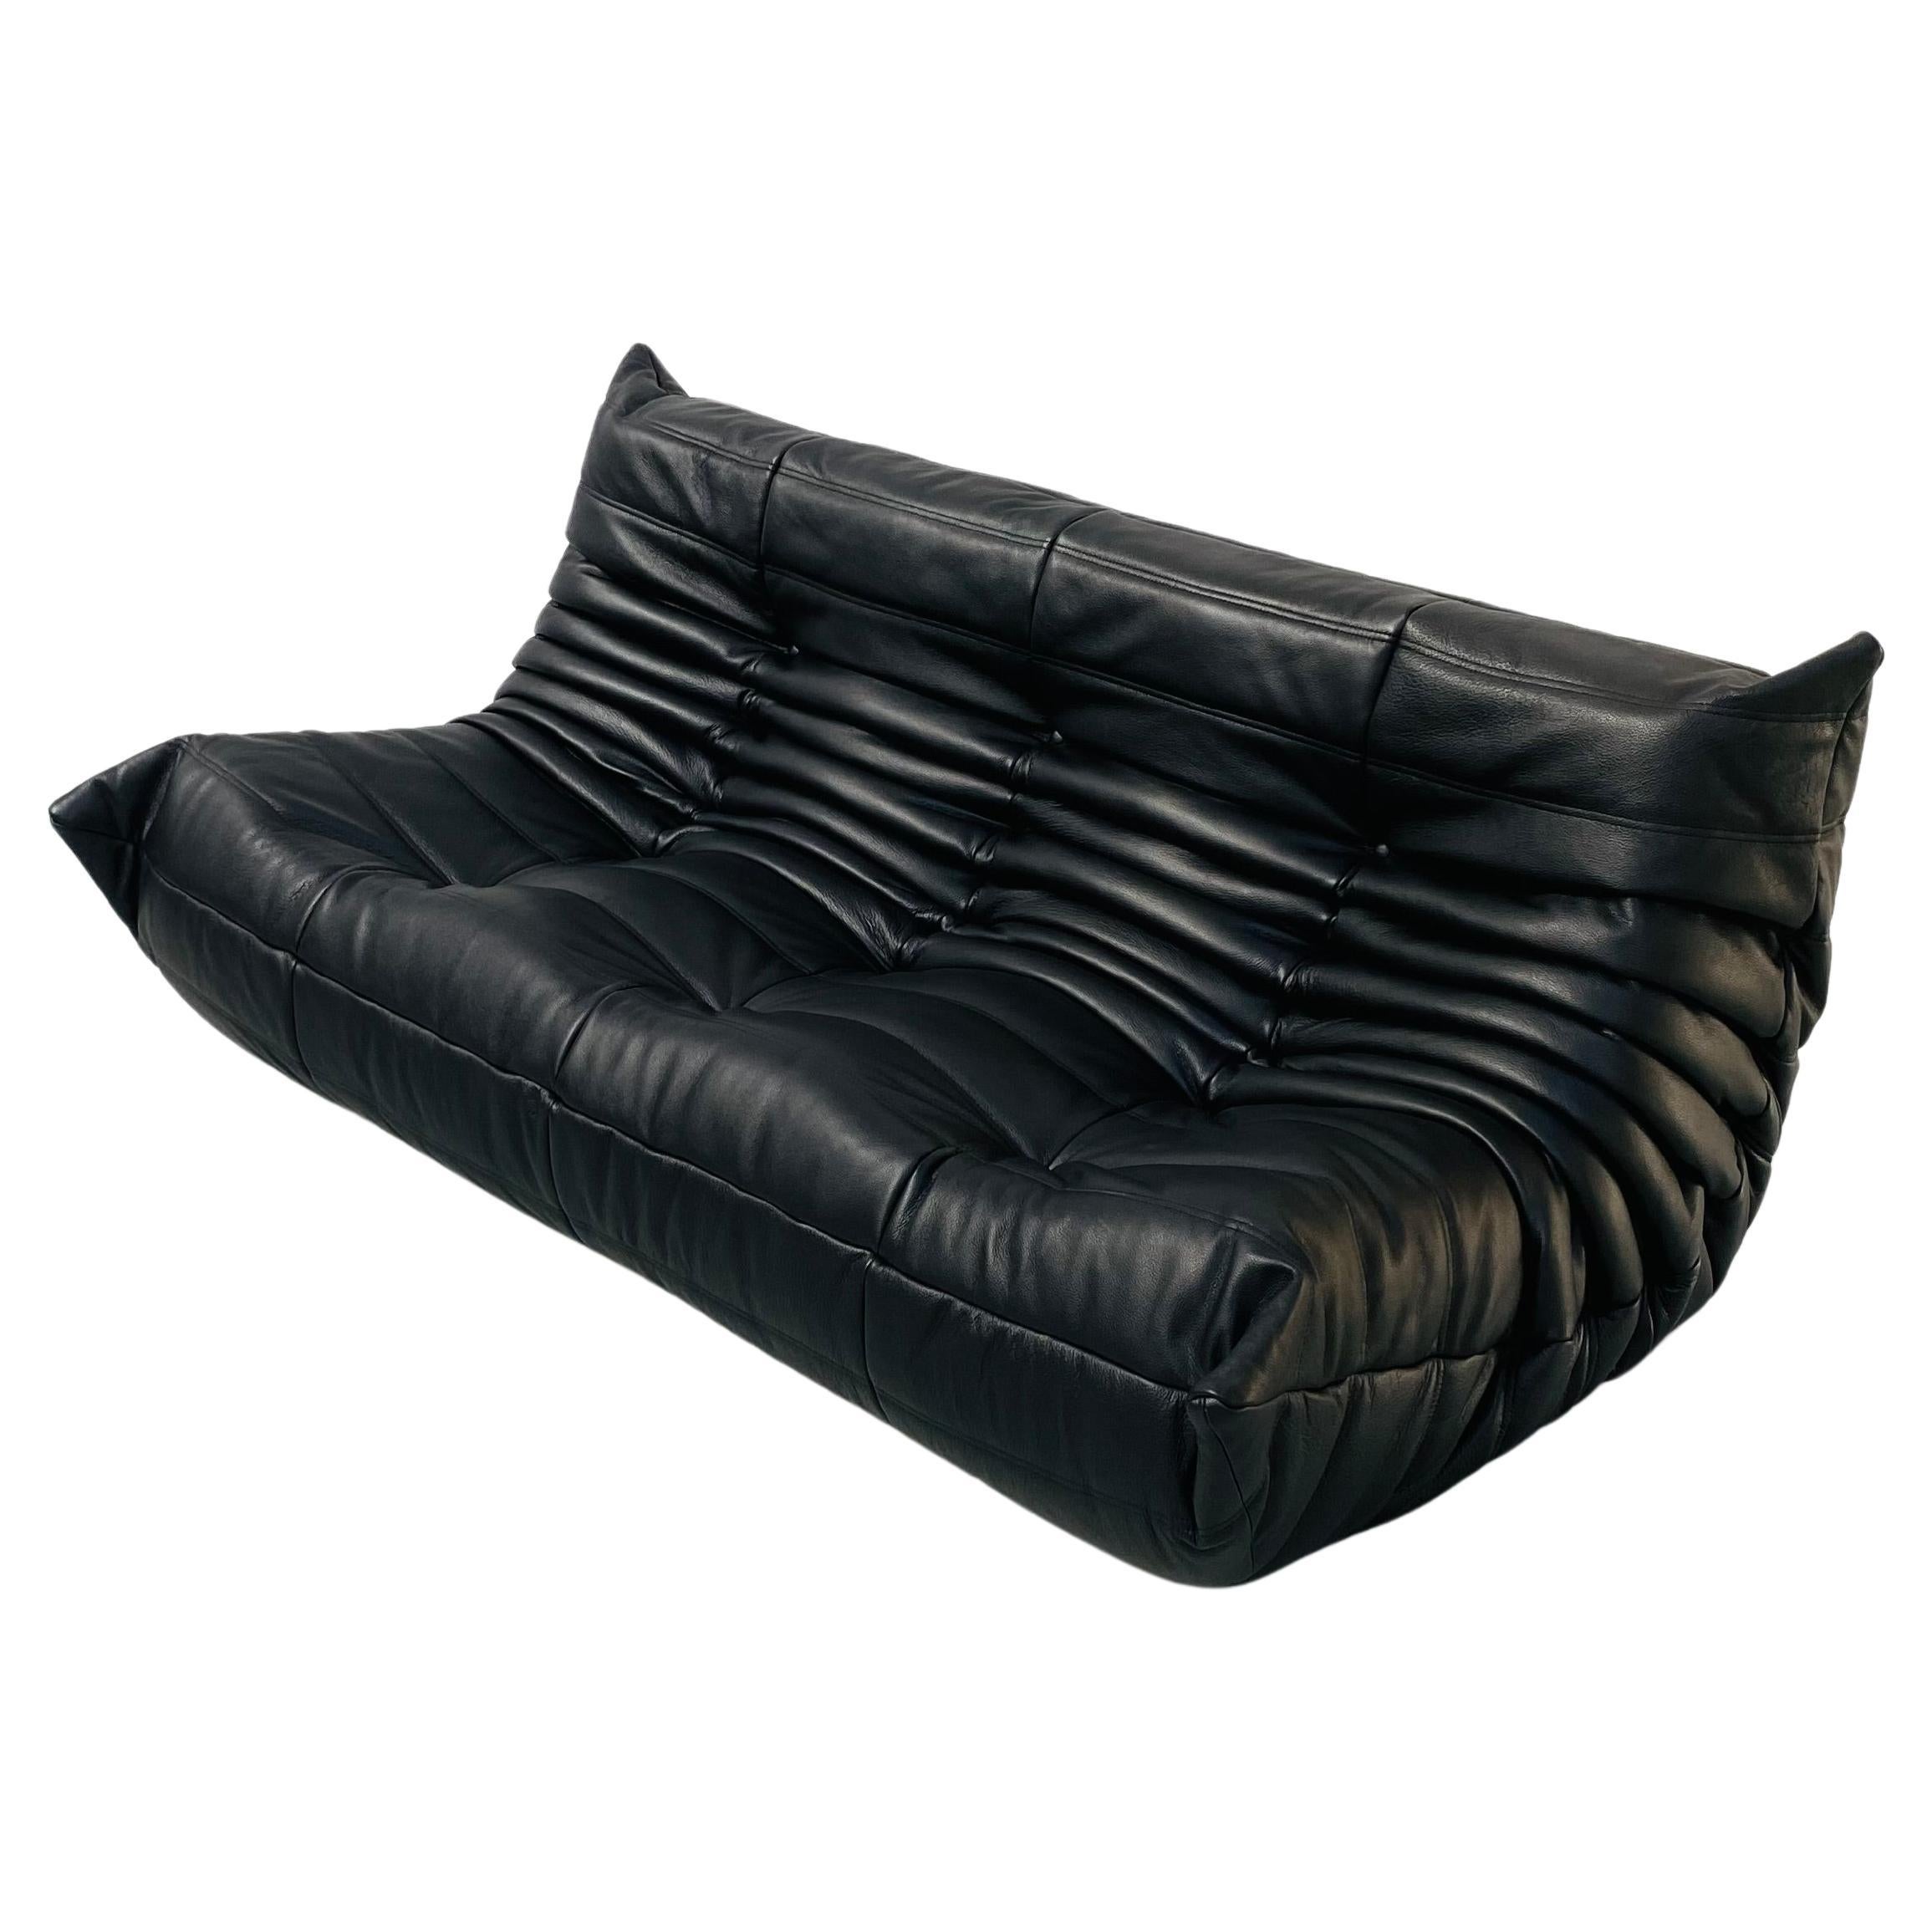 French Togo Sofa in Black Leather by Michel Ducaroy for Ligne Roset.